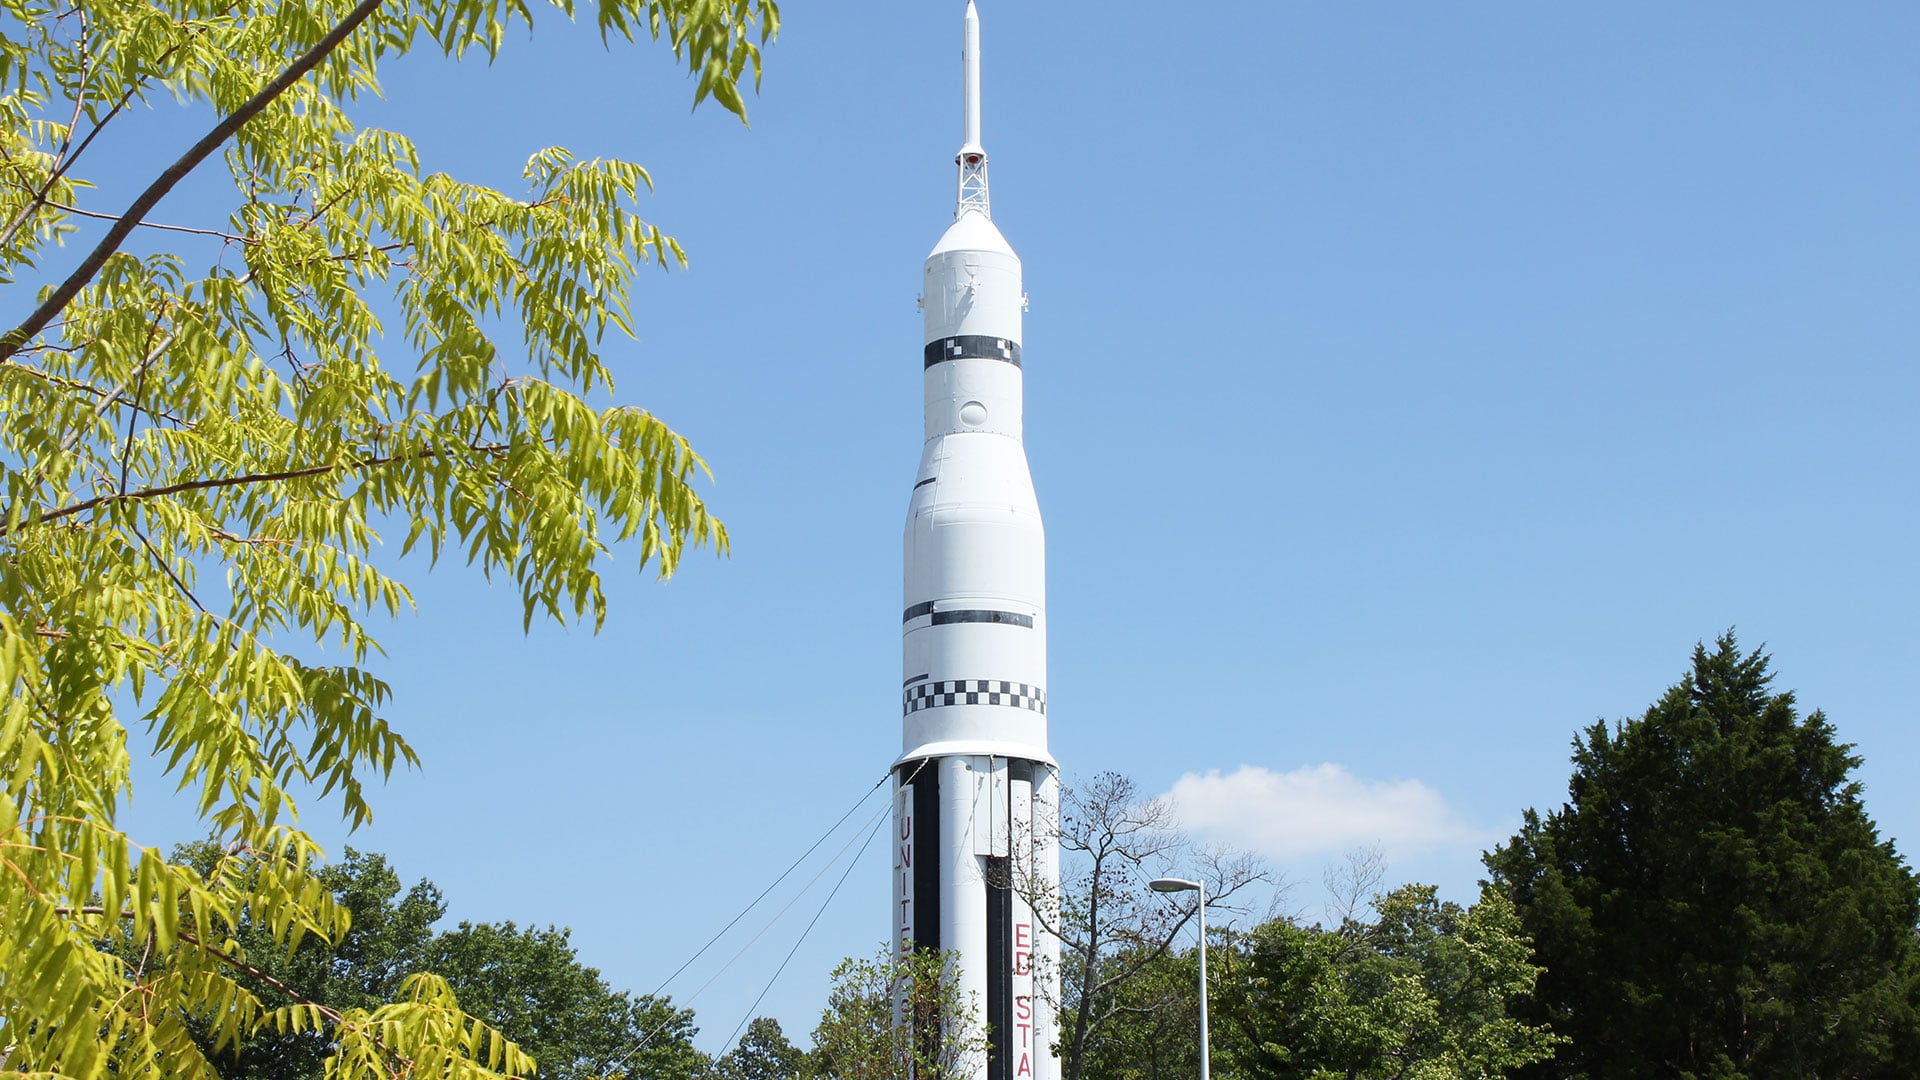 Saturn rocket at US space and Rocket Center